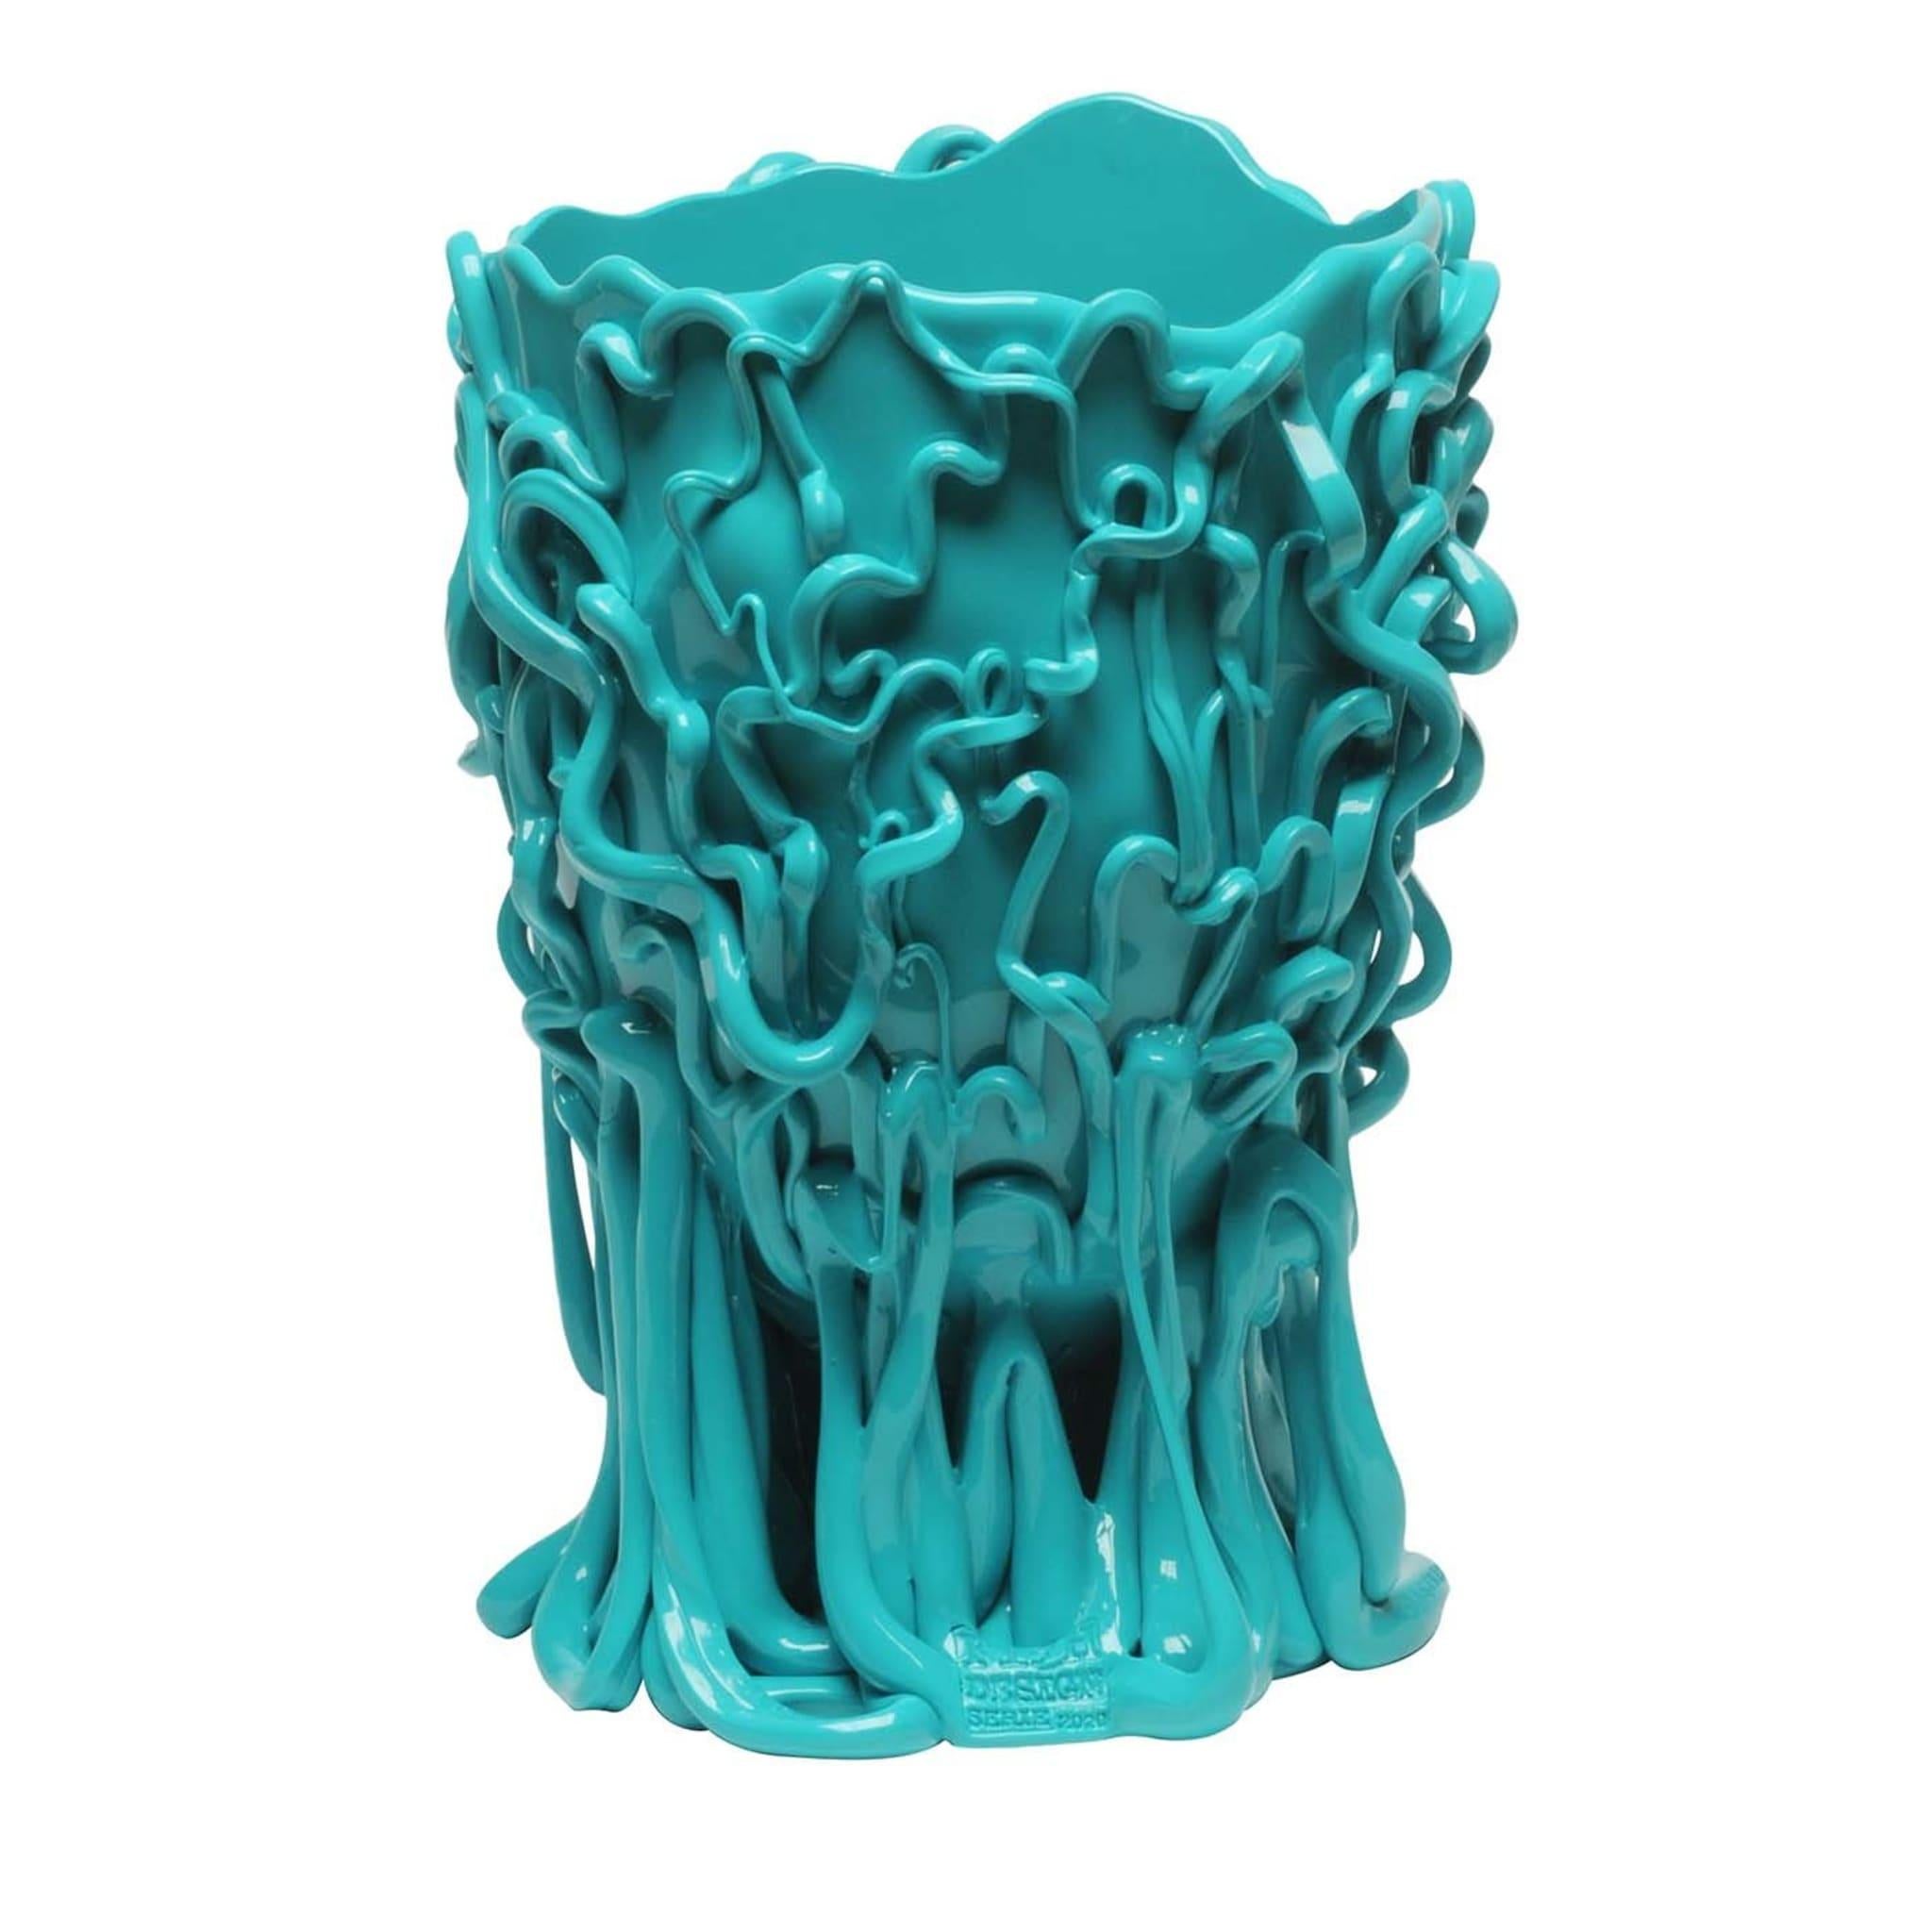 Monochromatic snake-like squiggles slither across the surface of this soft, resin vase in matte blue. This vase was created by one of Italy's most celebrated designers, Gaetano Pesce, in 1995 for the Fish Design Collection — Pesce is the Italian